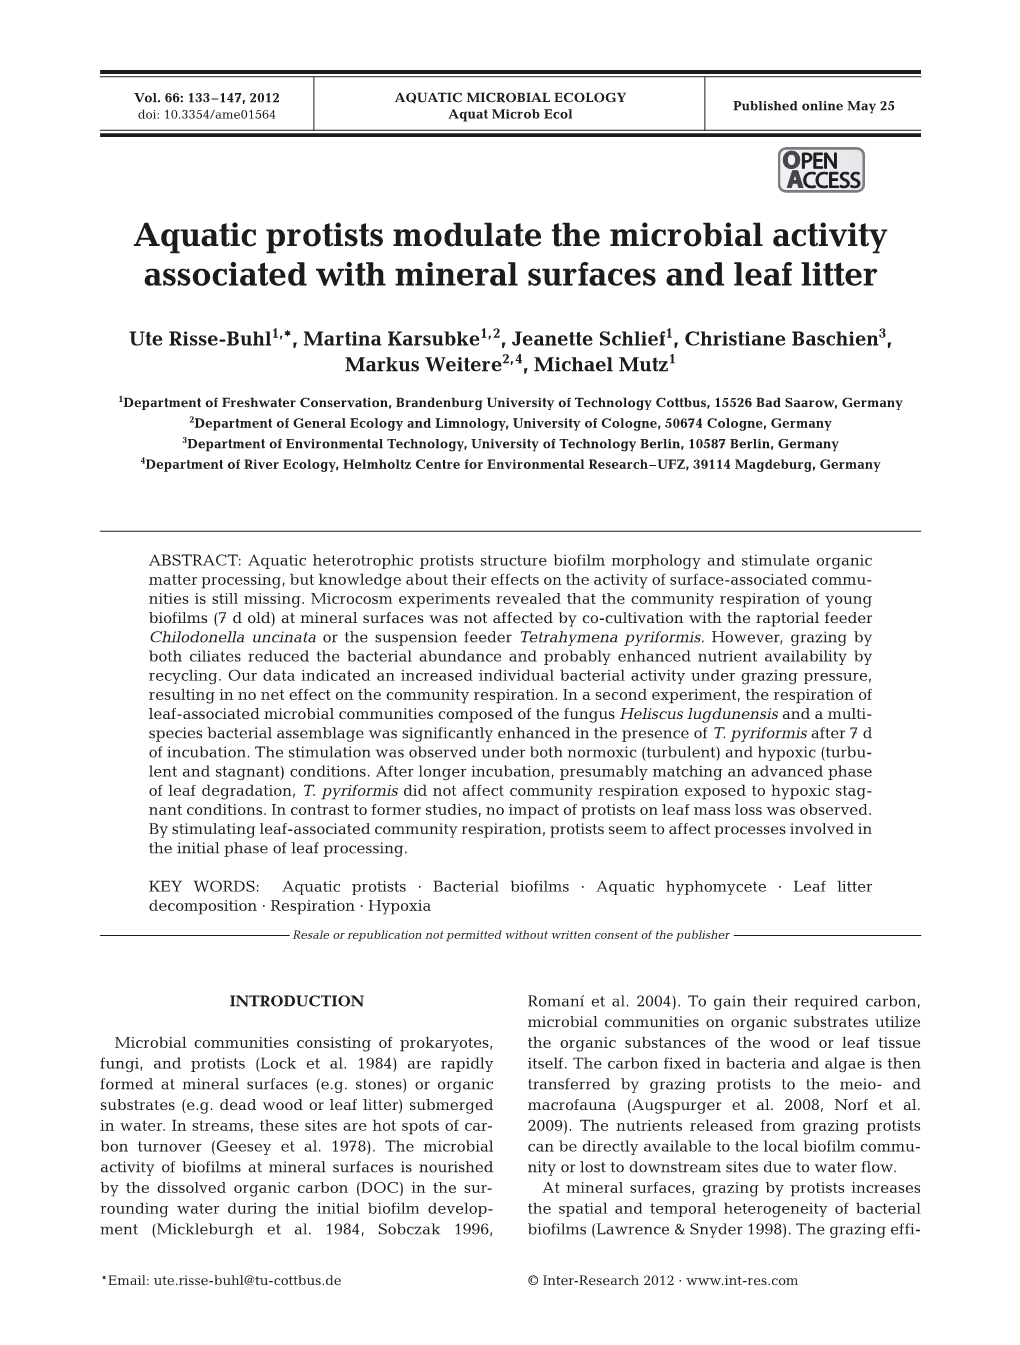 Aquatic Protists Modulate the Microbial Activity Associated with Mineral Surfaces and Leaf Litter